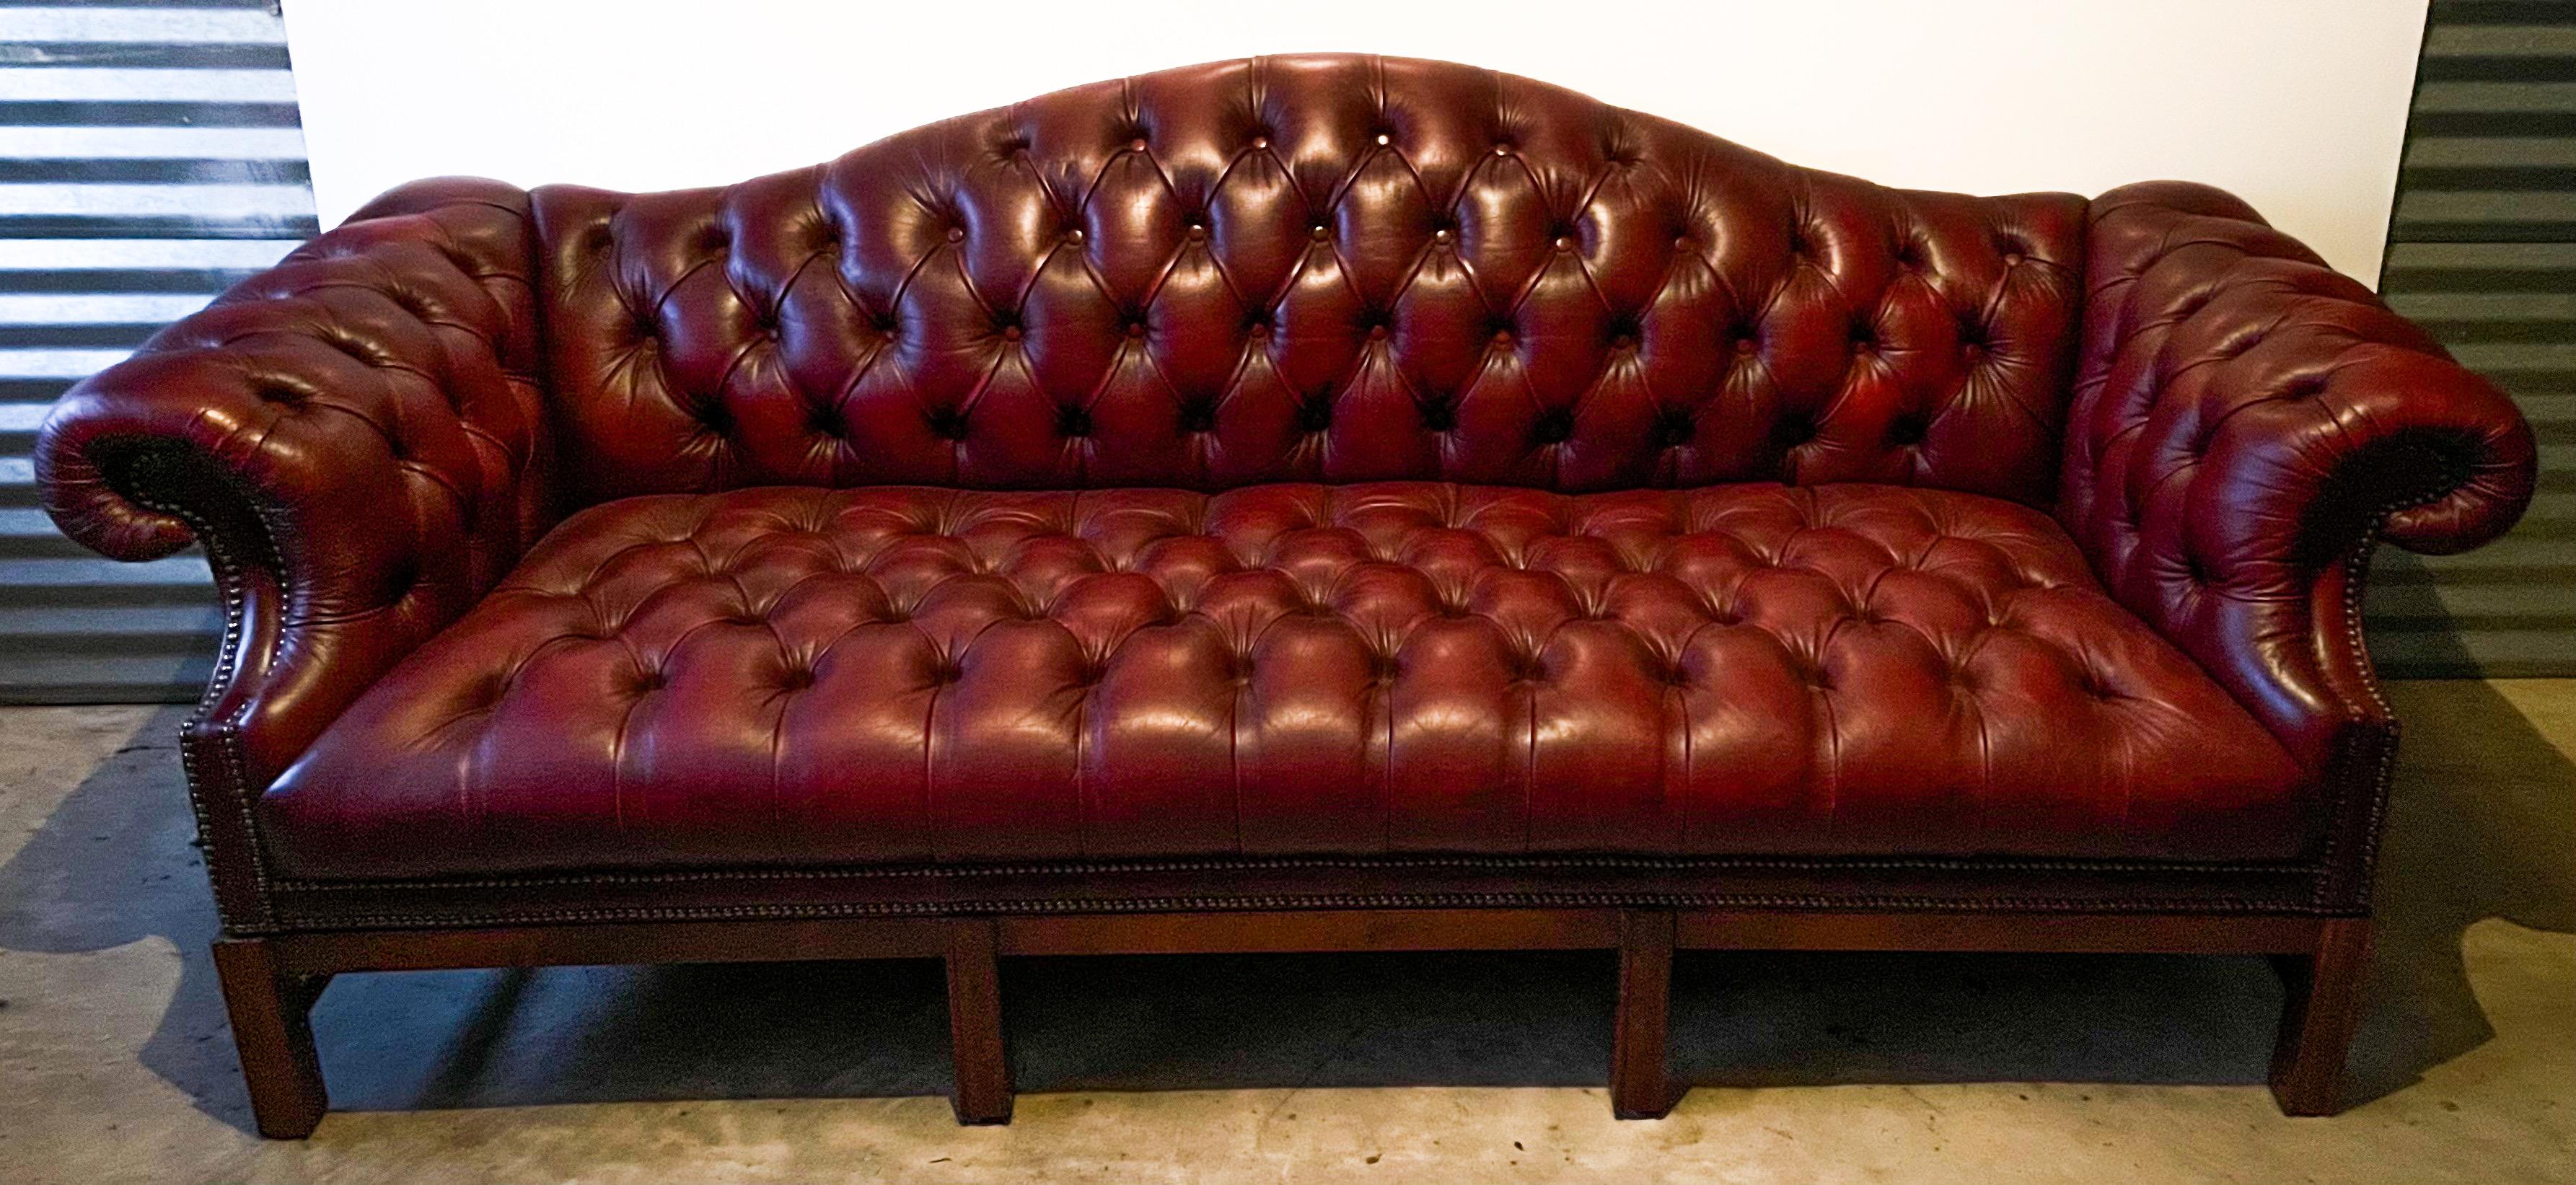 This is a wonderful 1950s burgundy / garnet English tufted leather chesterfield camelback sofa. The frame is mahogany, and it is in very good condition. It is unmarked.